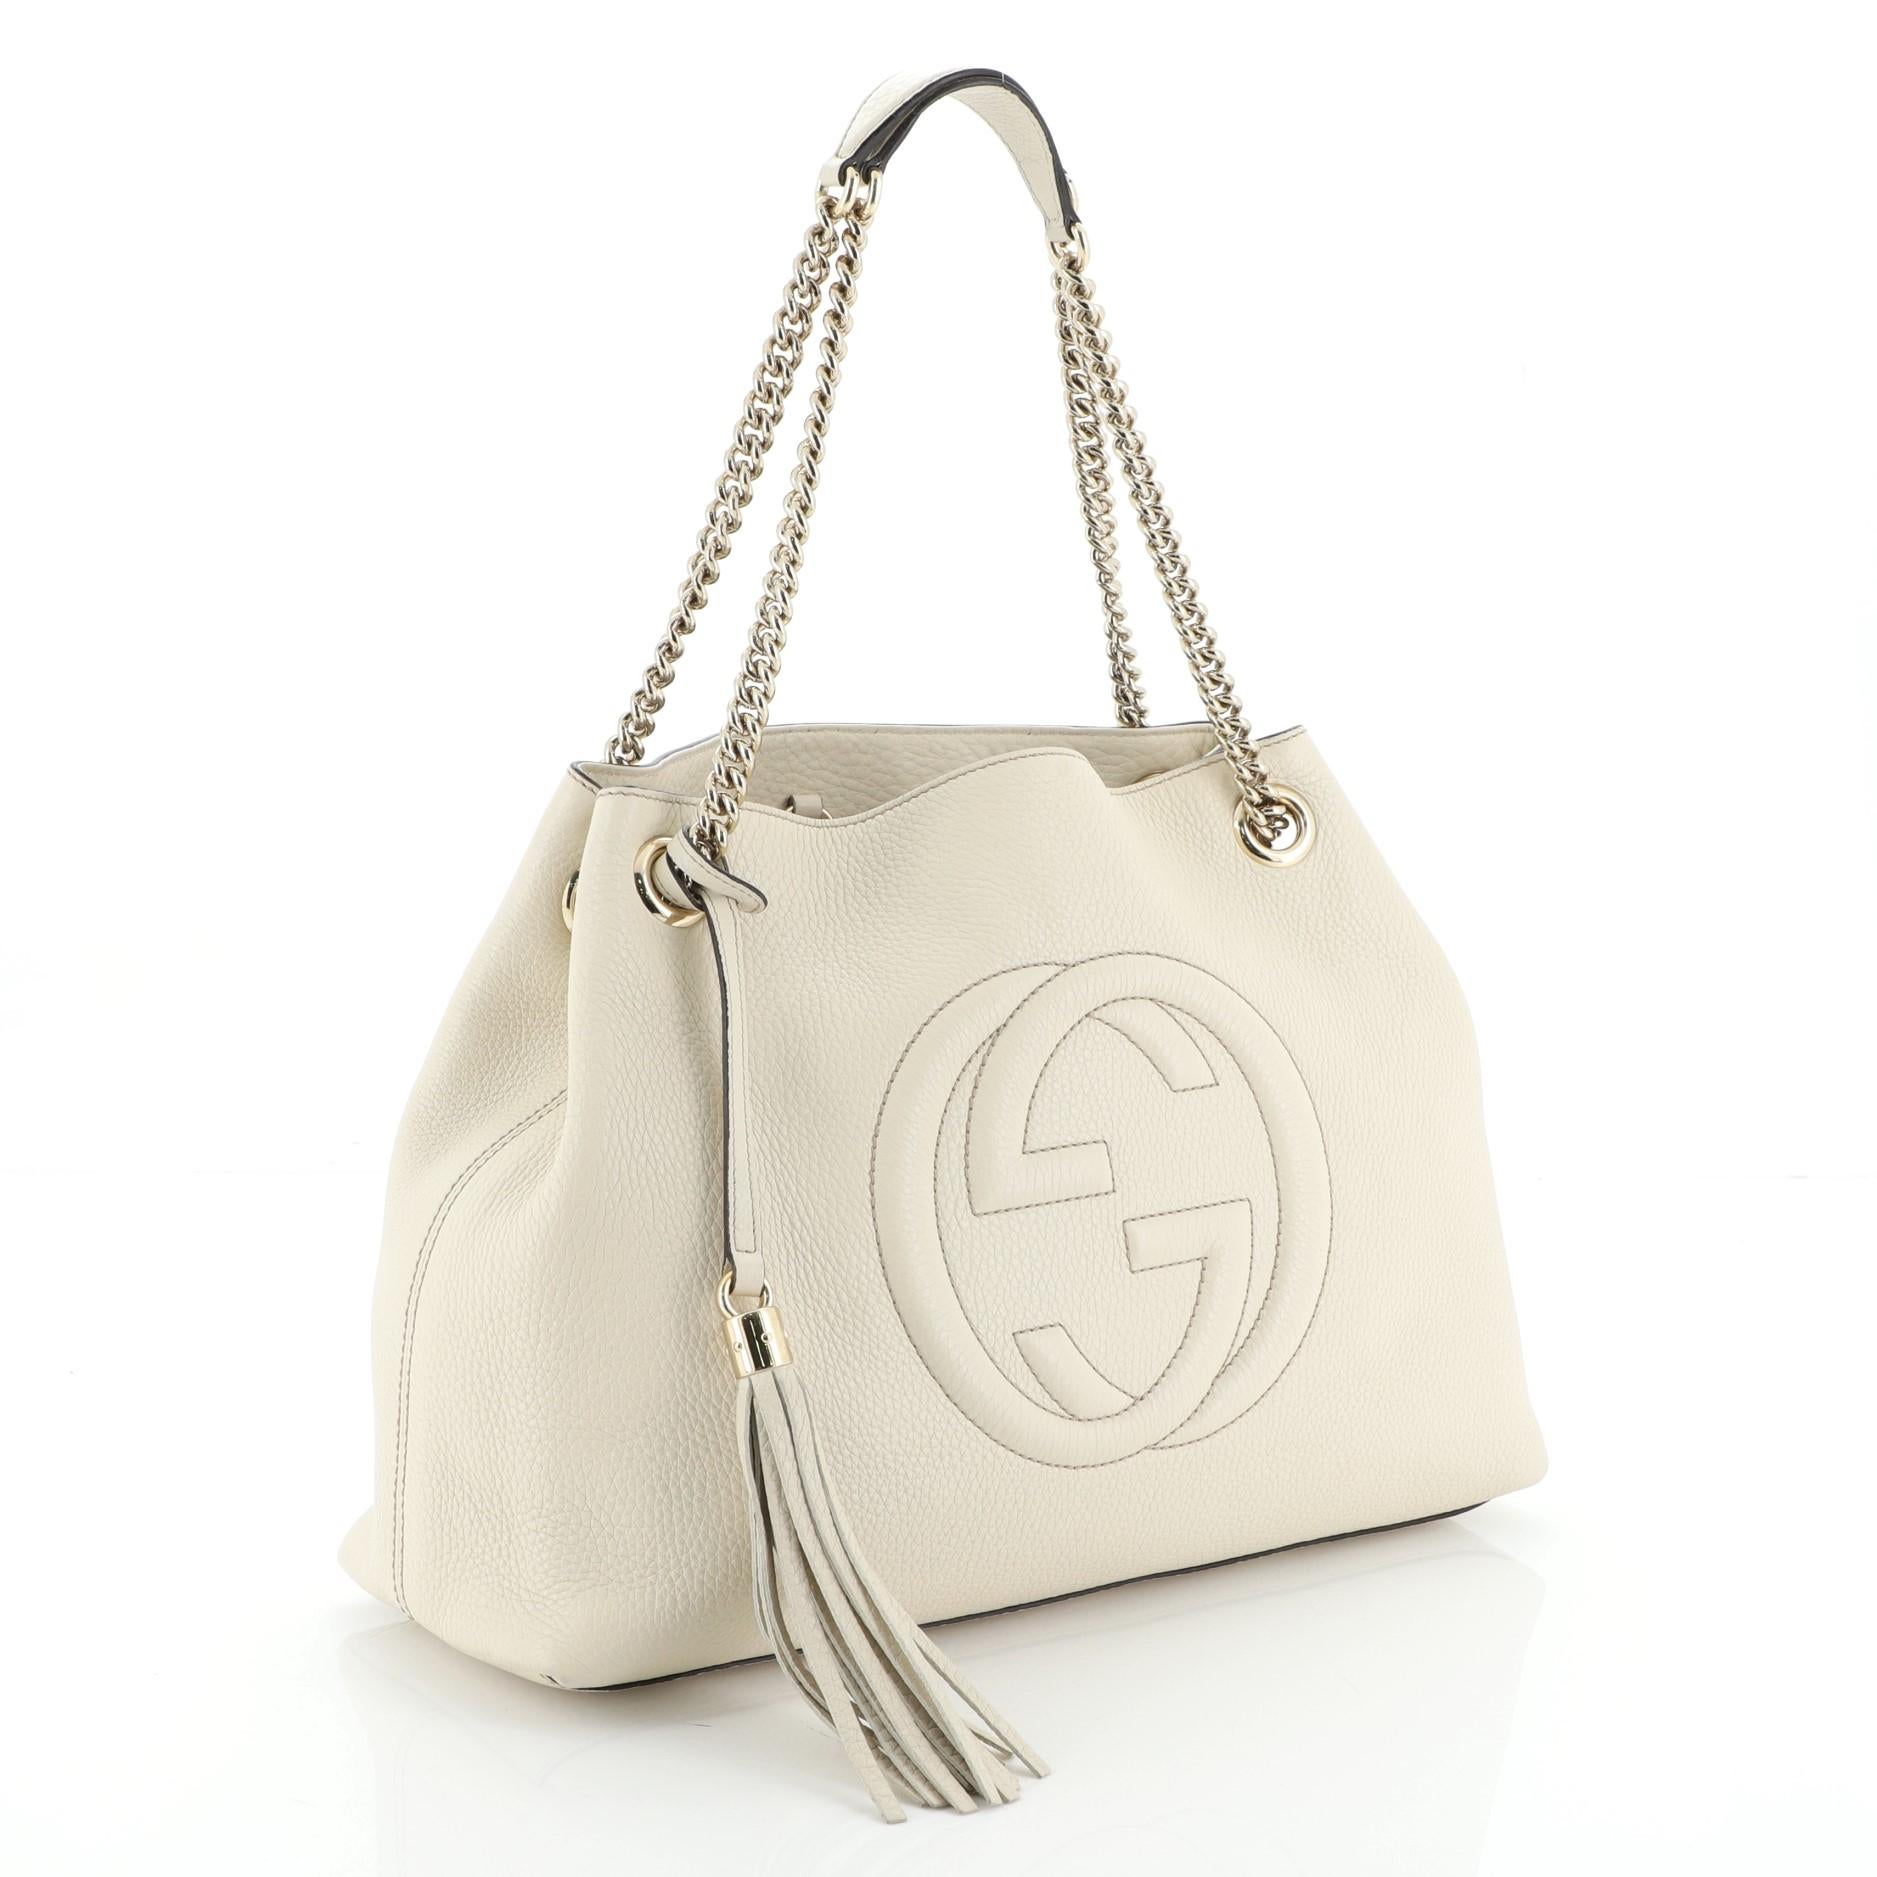 This Gucci Soho Chain Strap Shoulder Bag Leather Medium, crafted in neutral leather, features chain link straps with leather pads and gold-tone hardware. Its hook clasp closure opens to a neutral canvas and fabric interior with side zip and slip